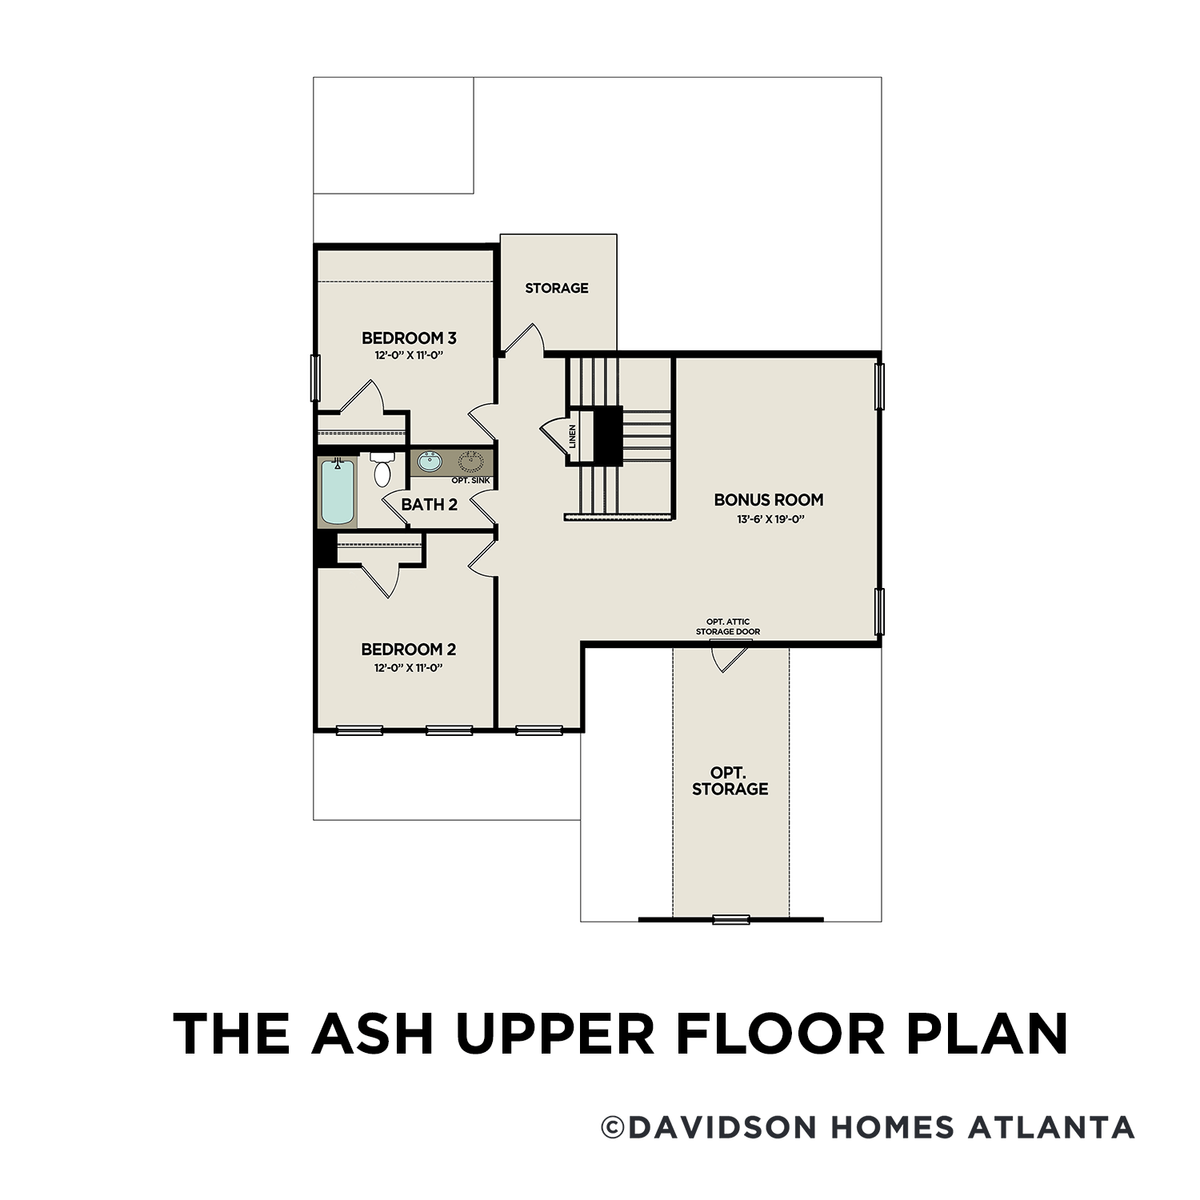 2 - The Ash B floor plan layout for 1506 Woodland Knoll Court in Davidson Homes' Highland Forest community.